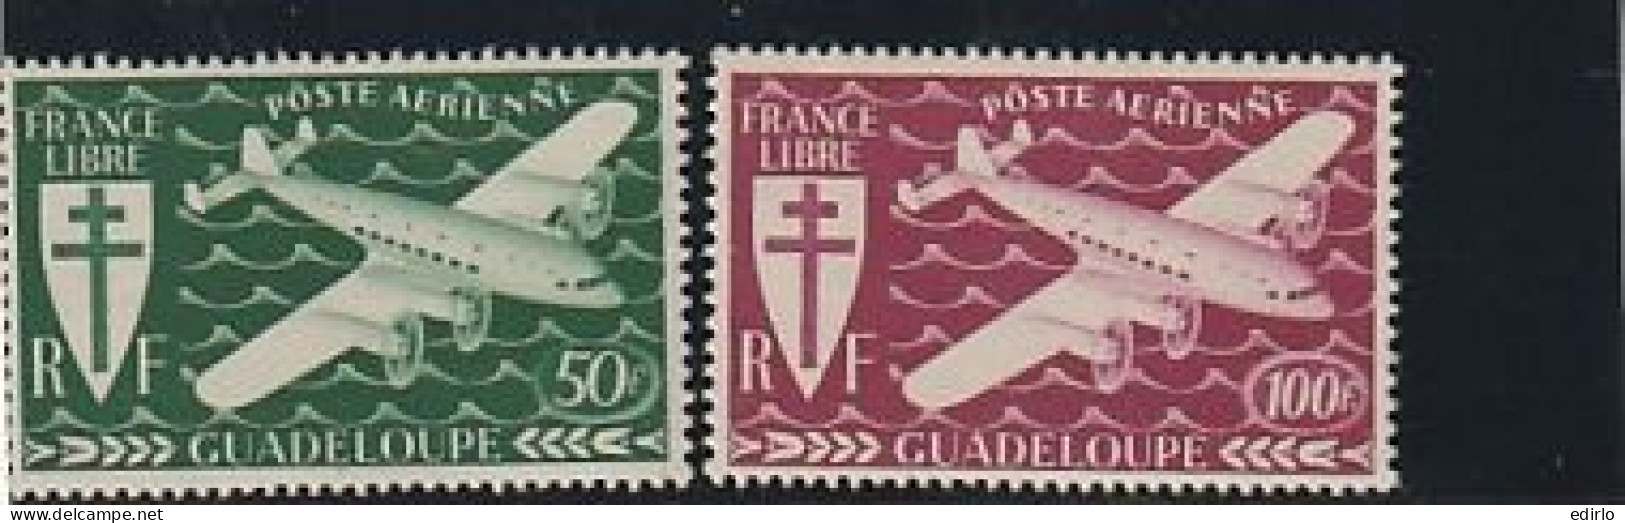 ///   FRANCE ///   GUADELOUPE  Poste Aérienne N° 4/5 ** - Luftpost